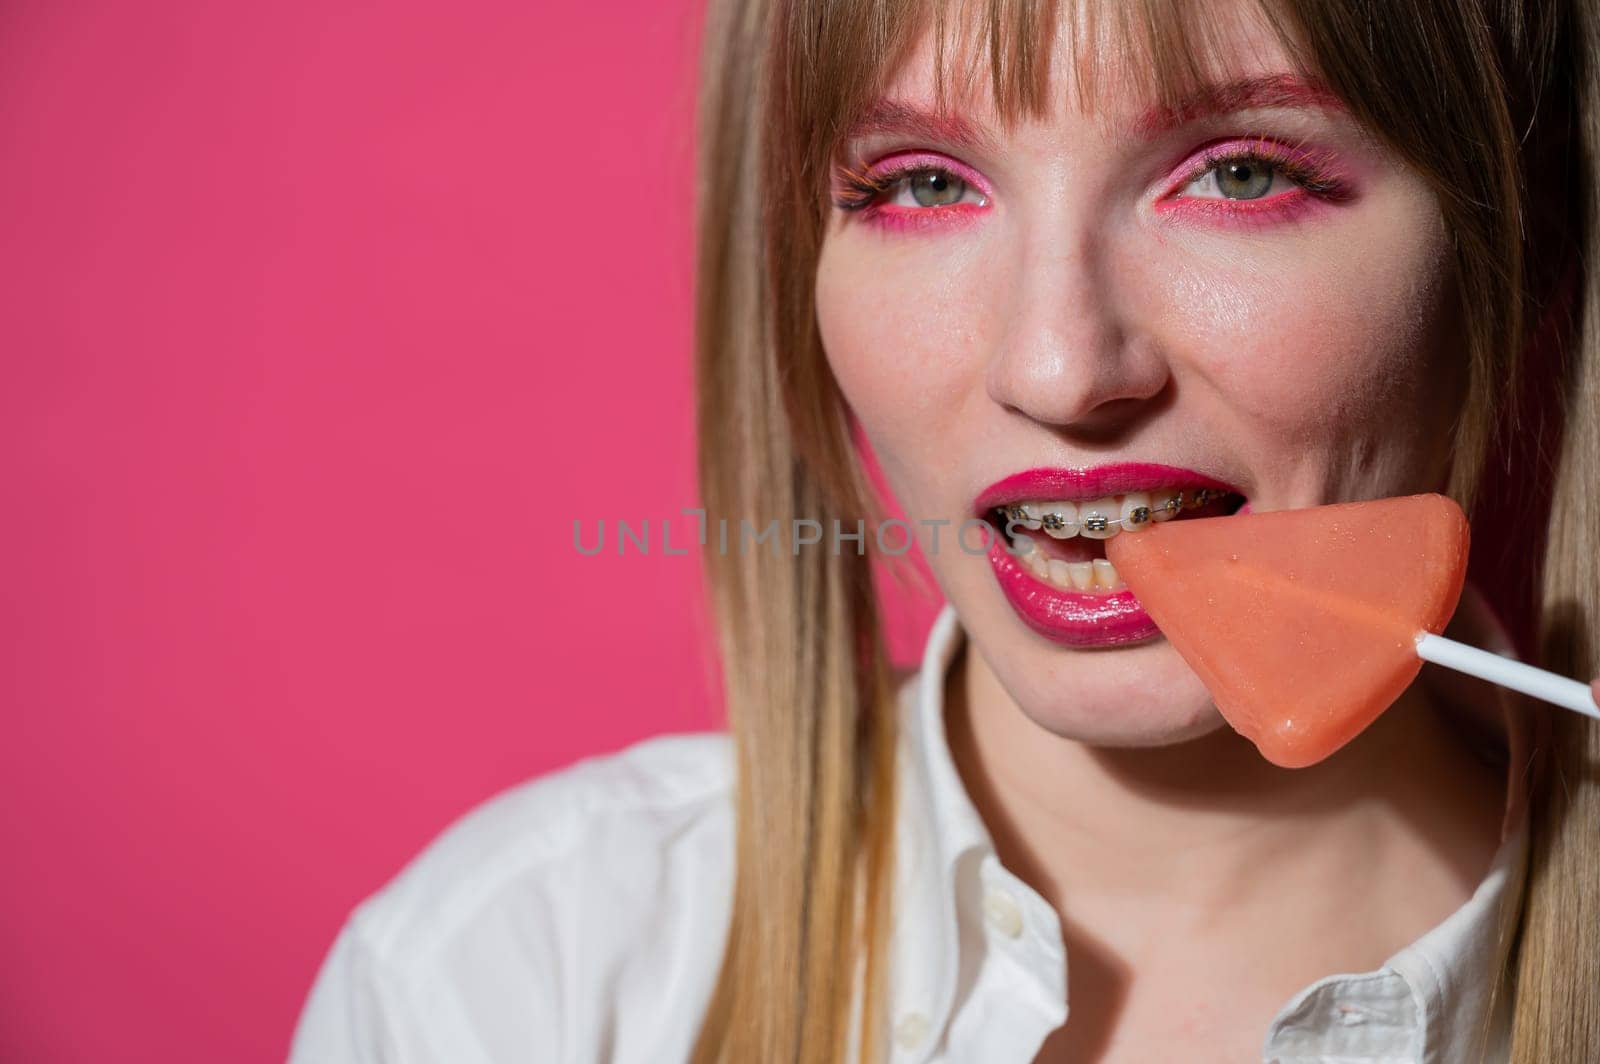 Portrait of a young woman with braces and bright makeup eating a lollipop on a pink background